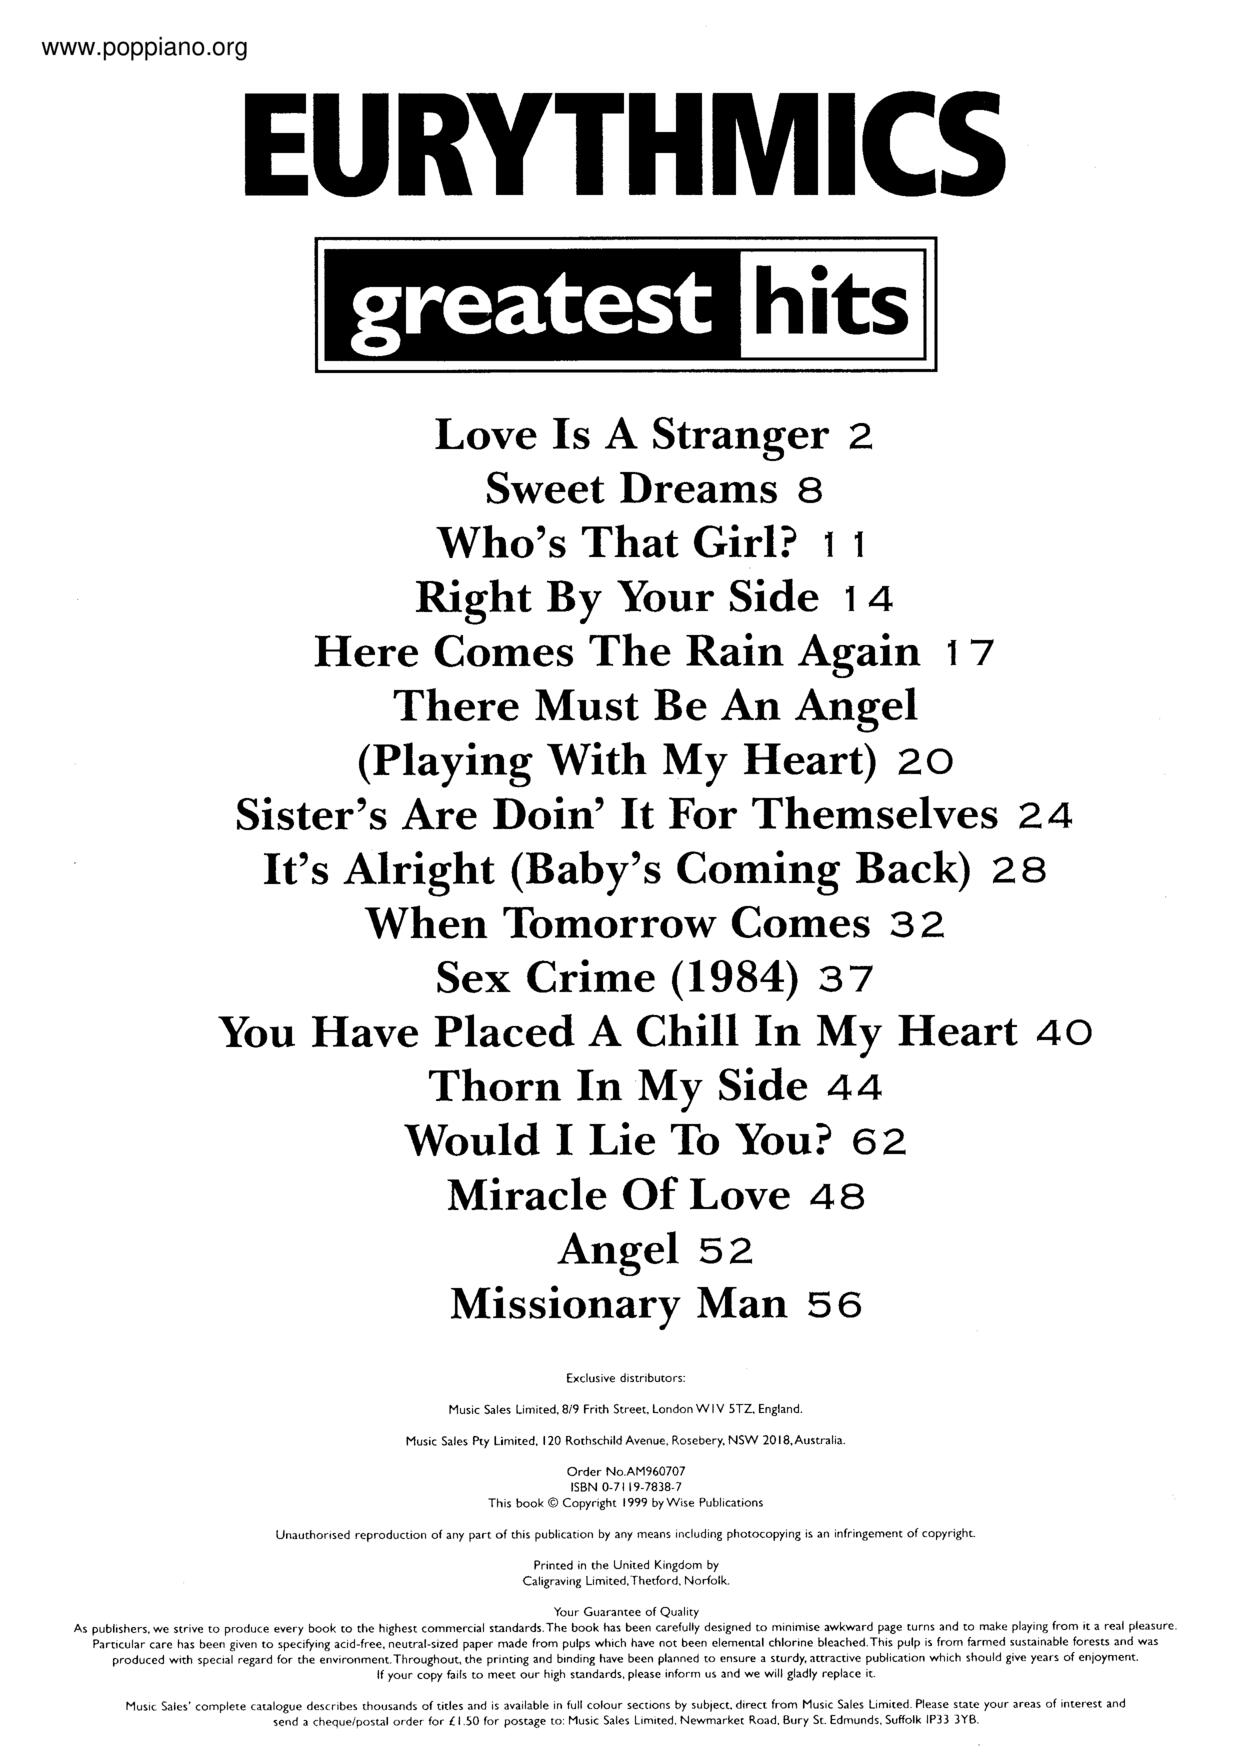 Eurythmics Greatest Hits 64 Pagesピアノ譜